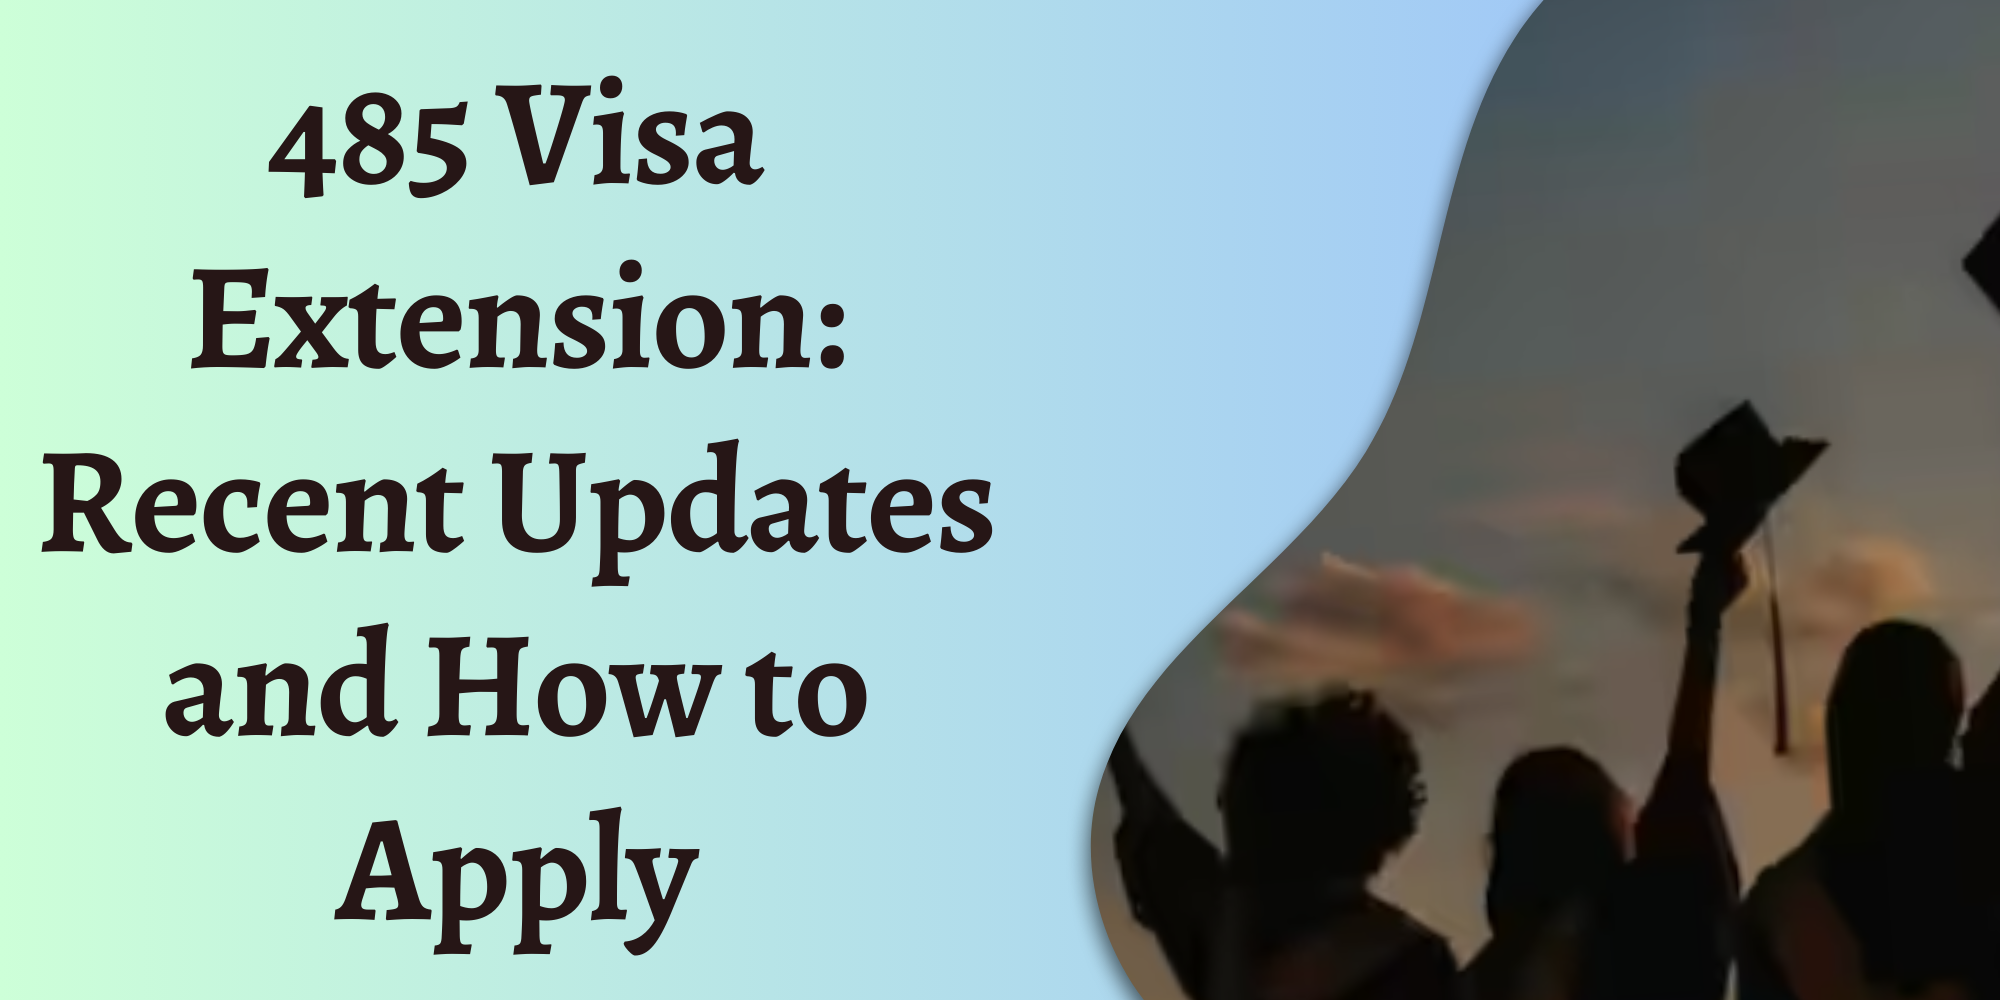 485-Visa-Extension-Recent-Updates-and-How-to-Apply.png